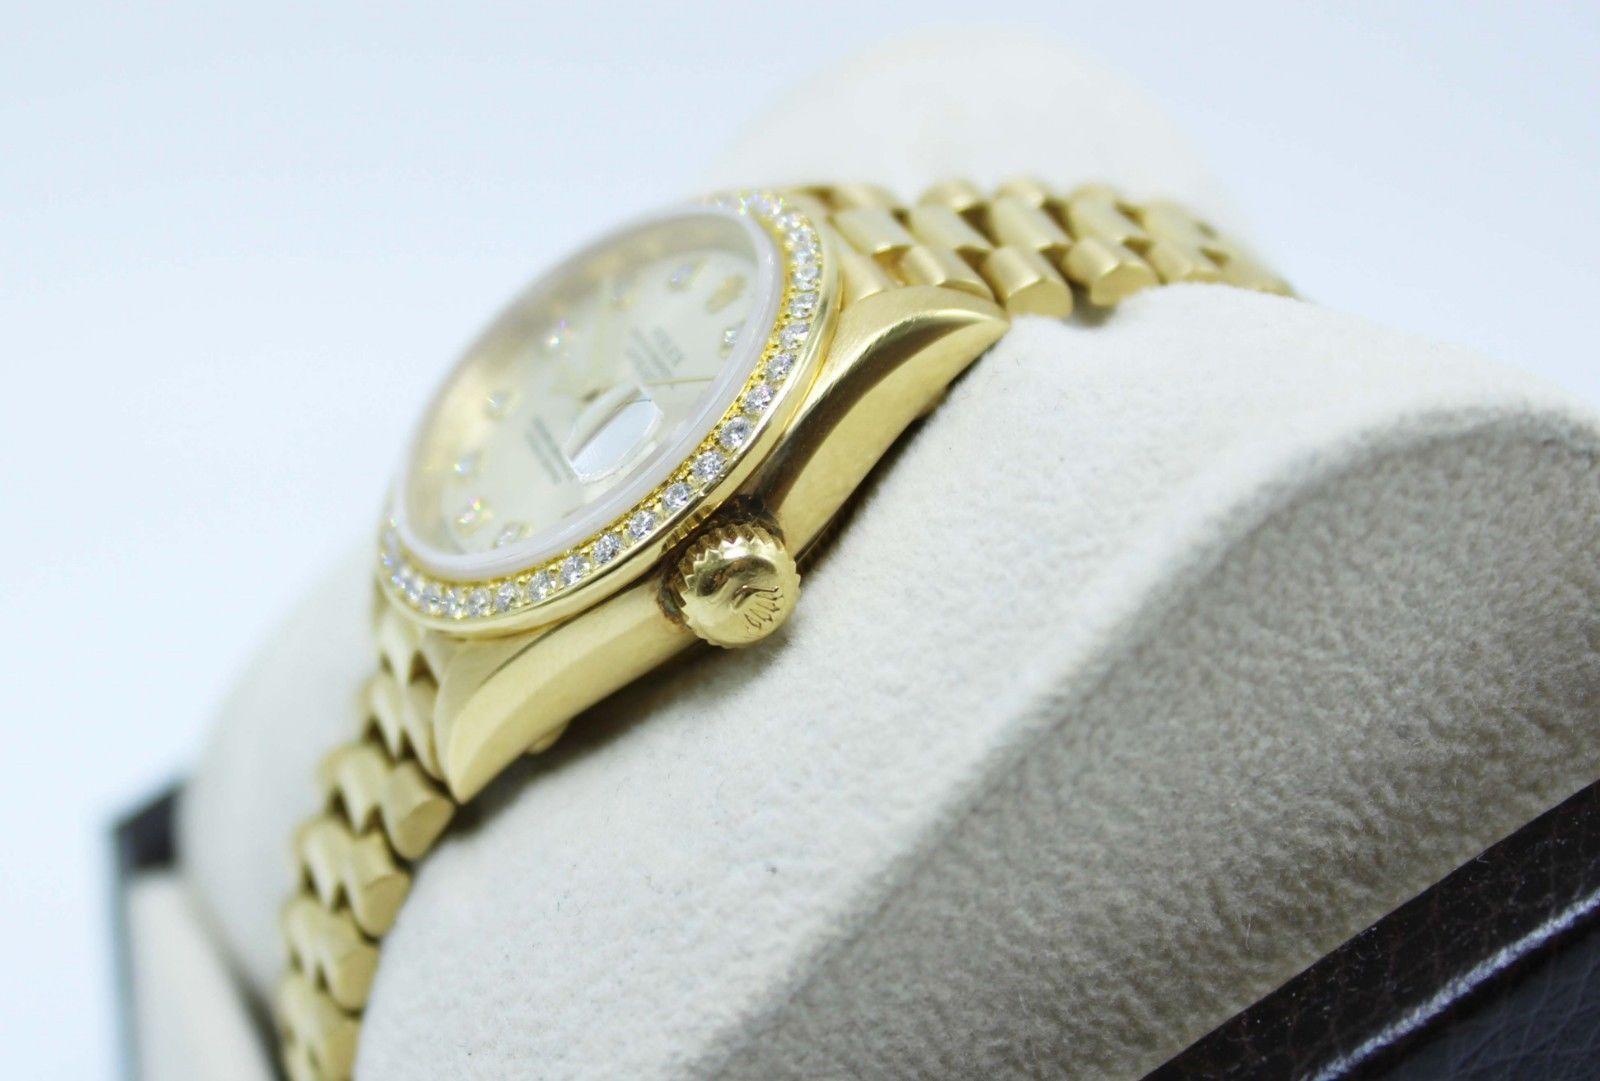 Style Number: 69138

Serial:  E927***                                                                               

Model: President Crown Collection 

Case: 18K Yellow Gold

Band: 18K Yellow Gold

Bezel: Original Factory Diamond Bezel 18K Yellow